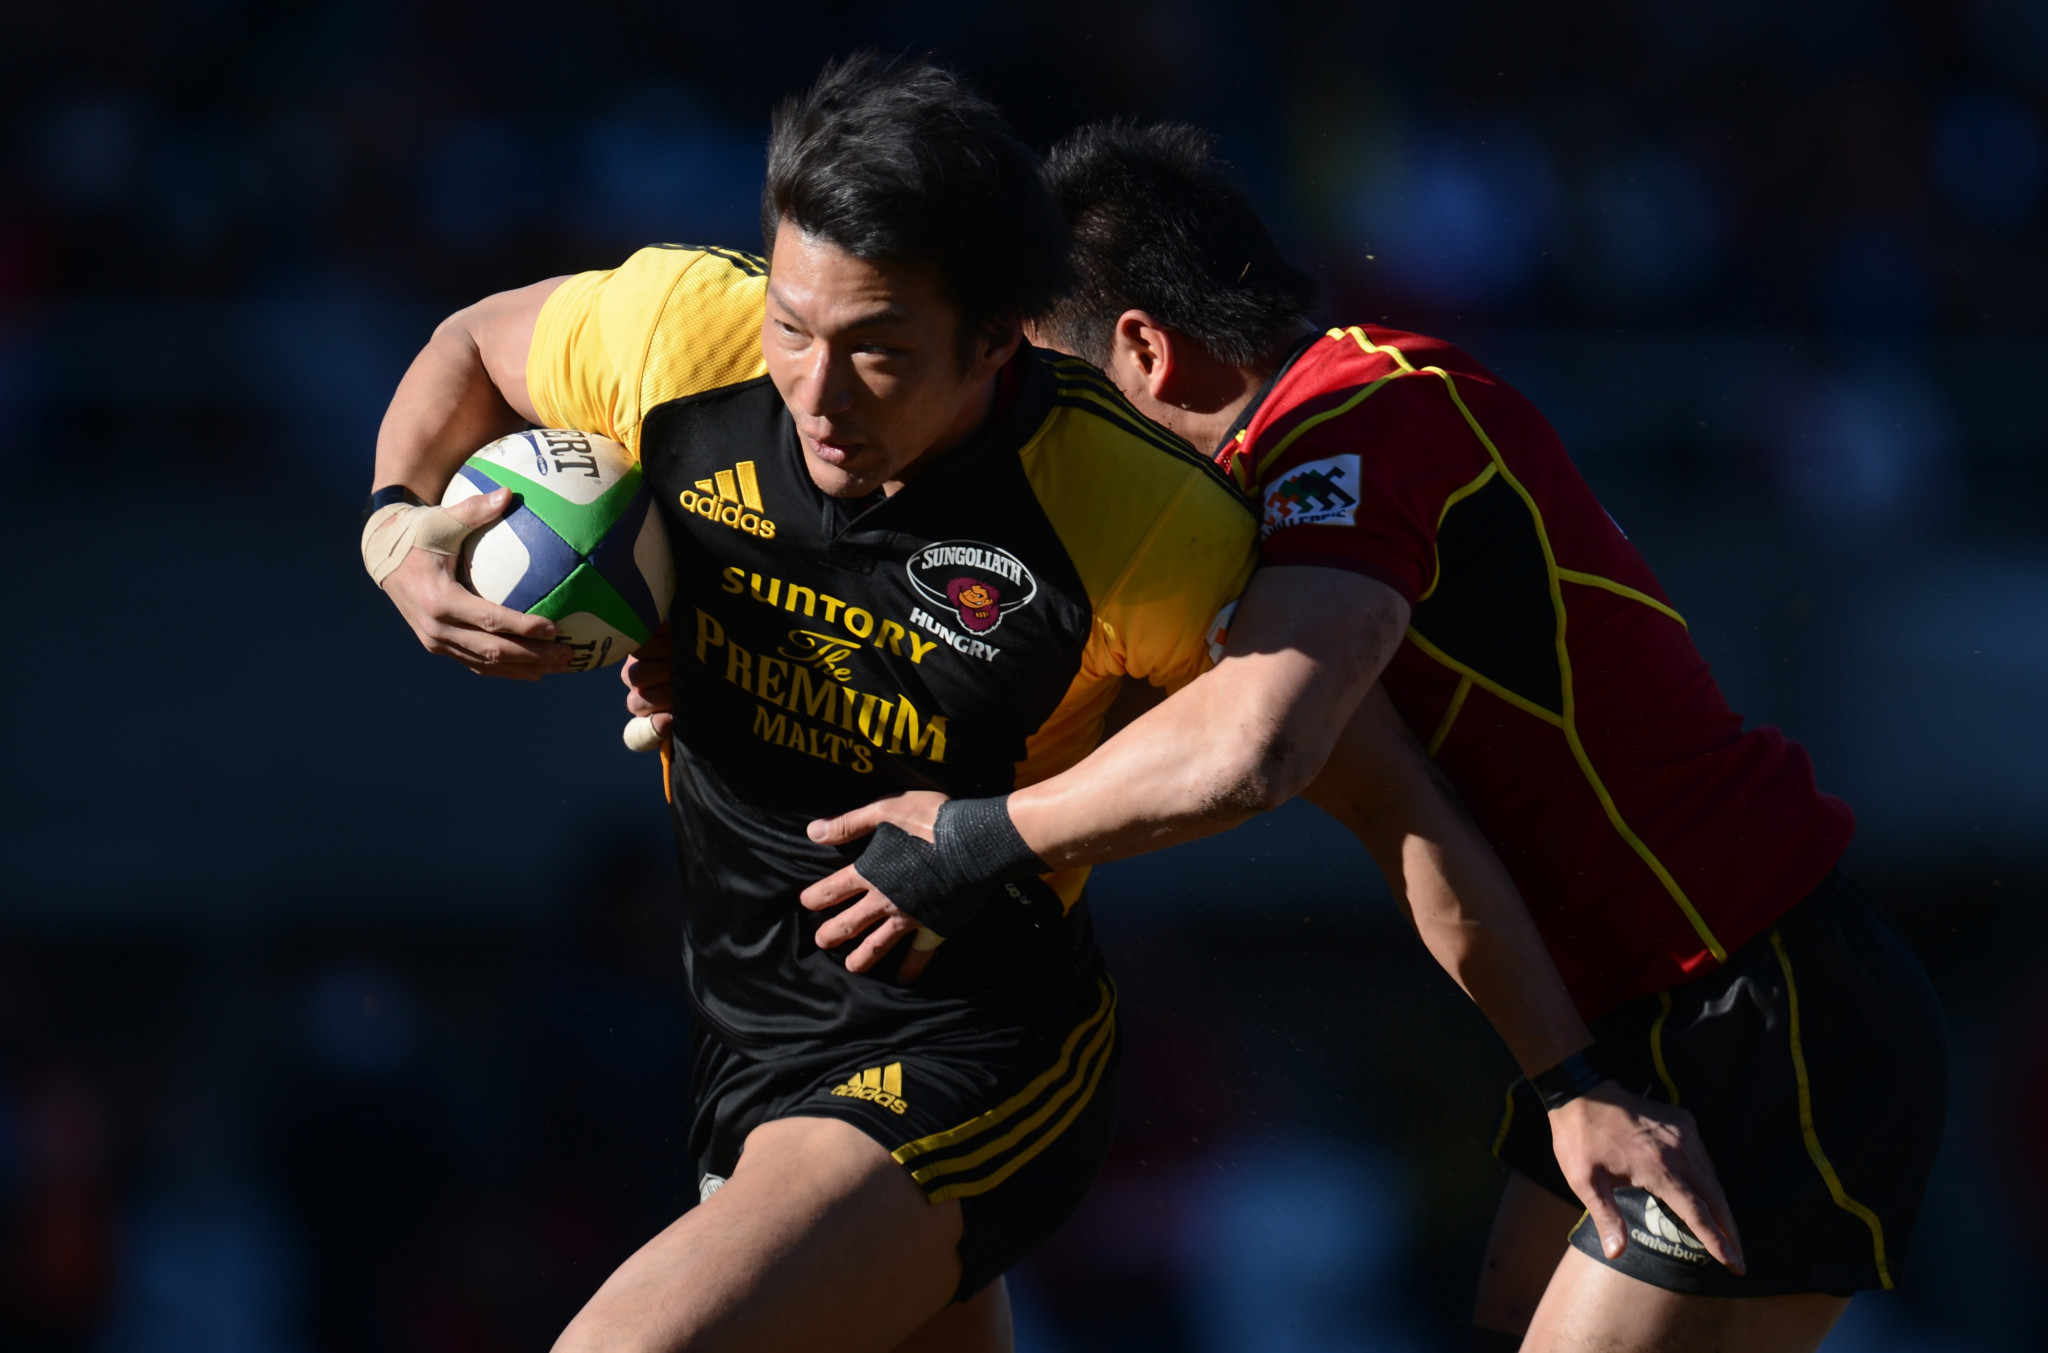 The Top League is the highest level of rugby competition in Japan ©Getty Images